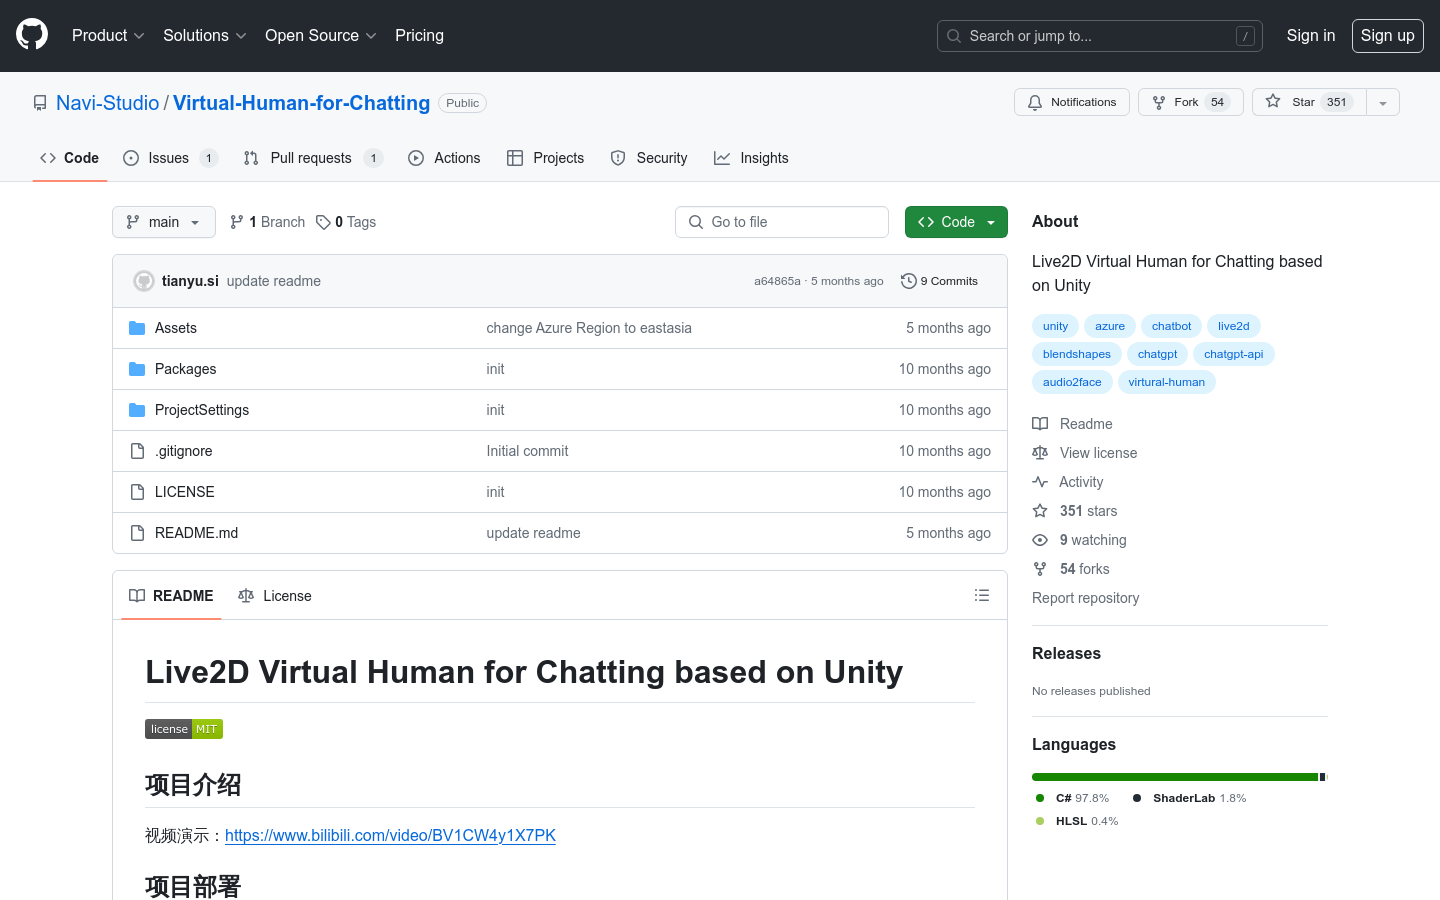 Live2D Virtual Human for Chatting based on Unity